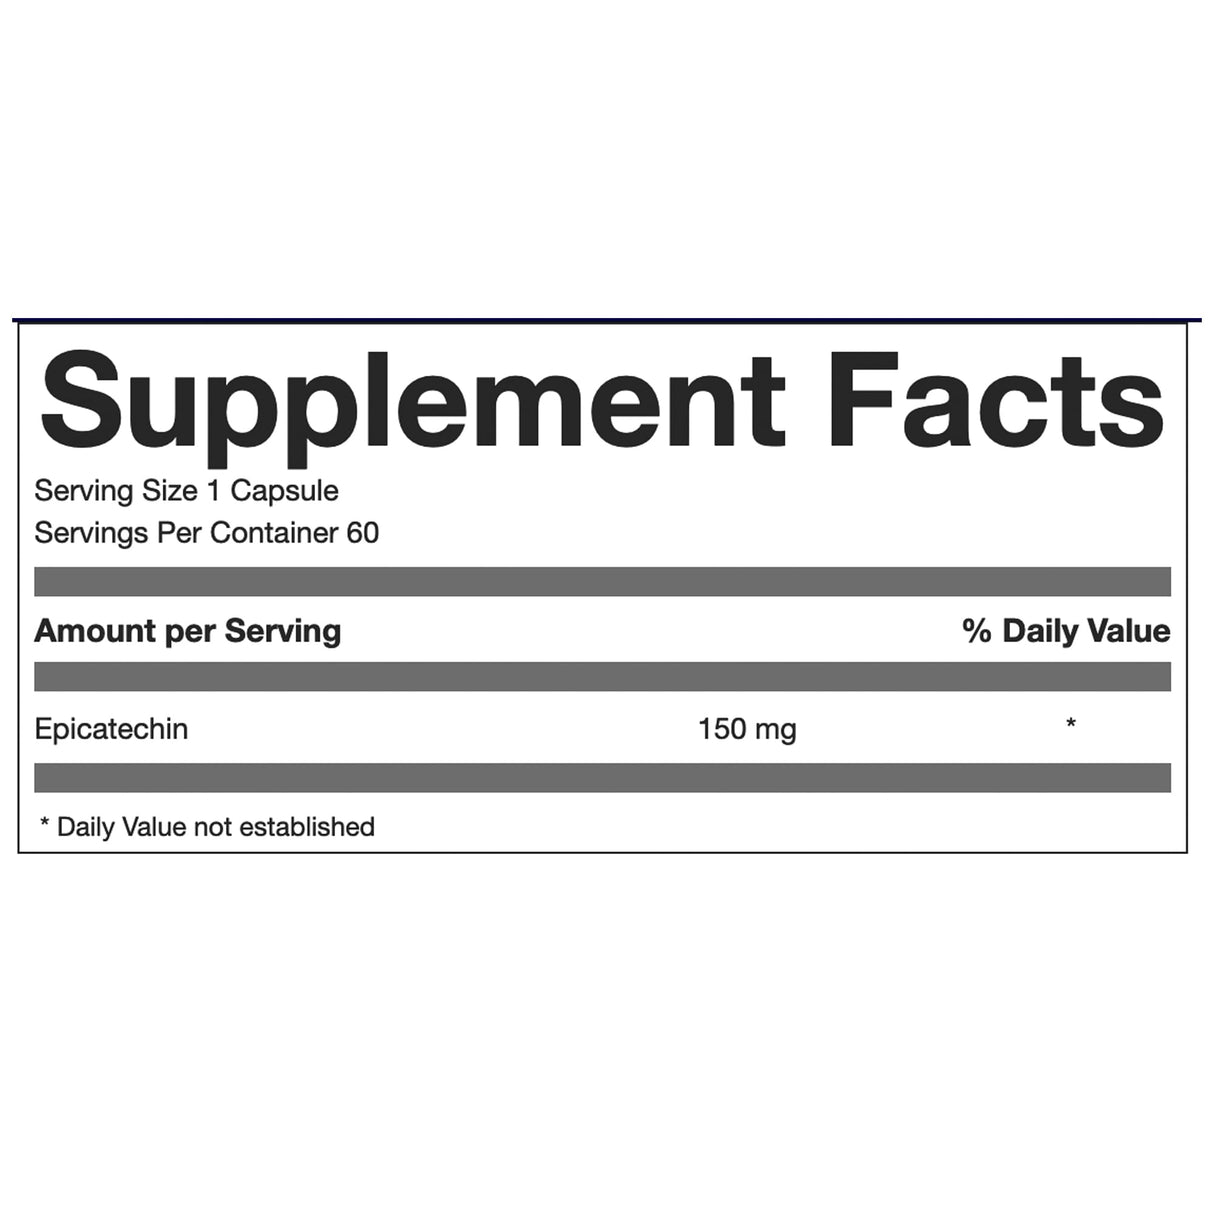 Chemical E - Myostatin and Insulin Support - Muscle Factory, LLC